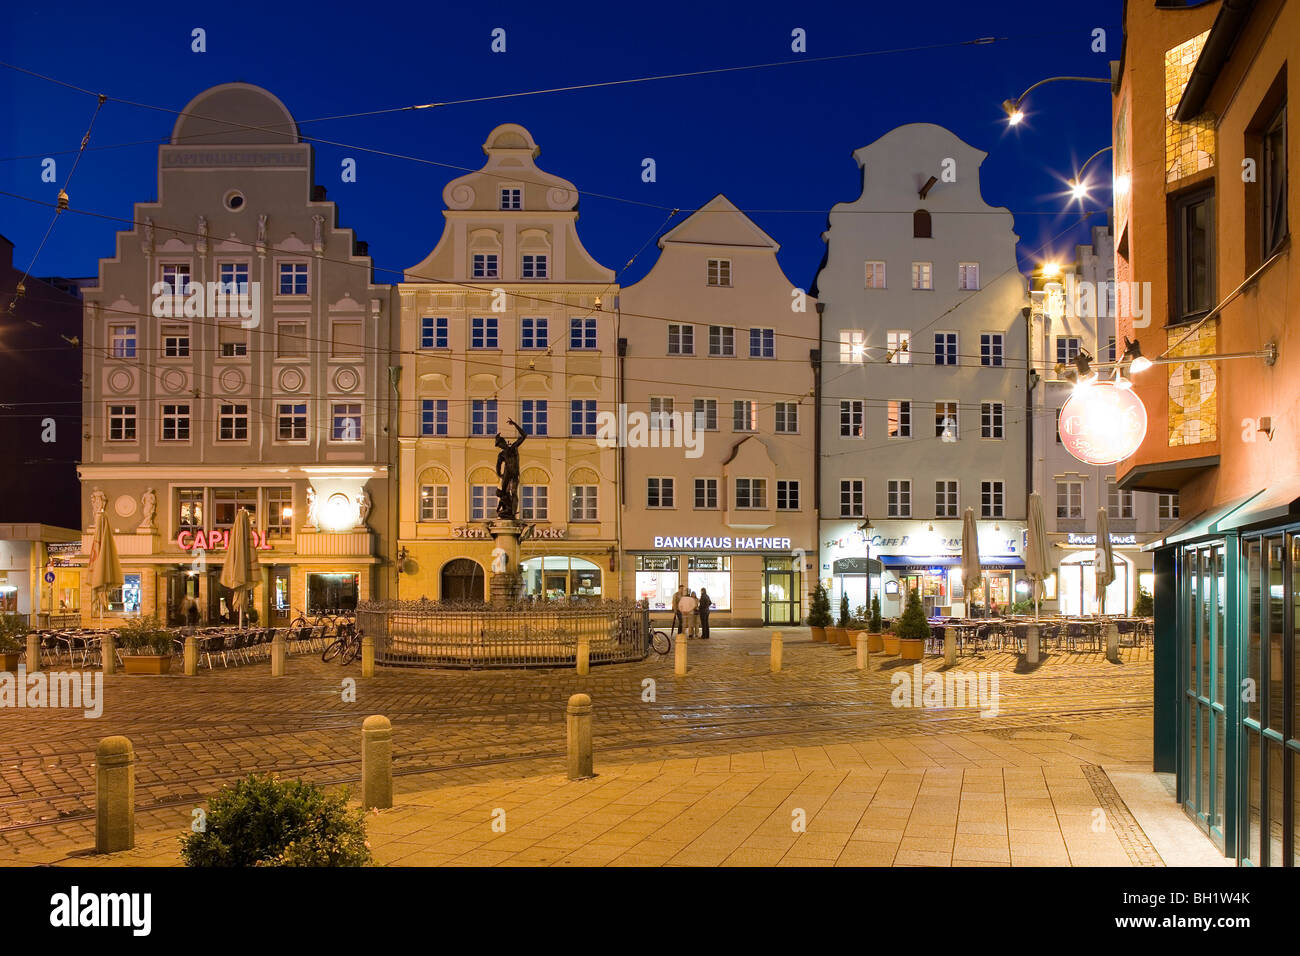 Moritzplatz at night, market square in the old town of Augsburg, Augsburg, Bavaria, Germany, Europe Stock Photo